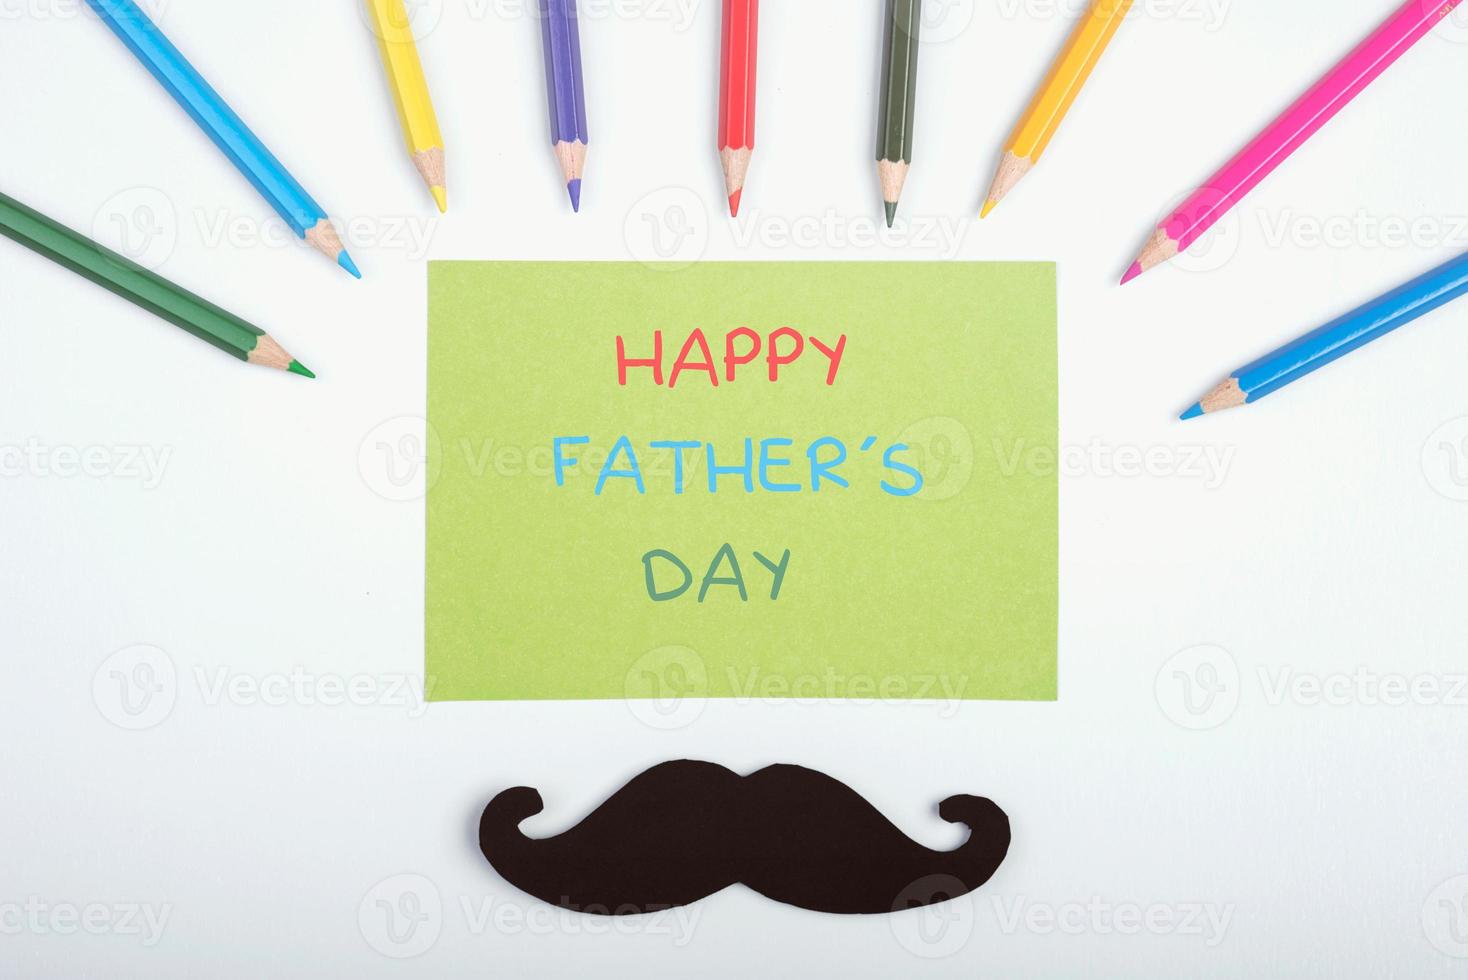 Colored pencils and father's day greetings photo